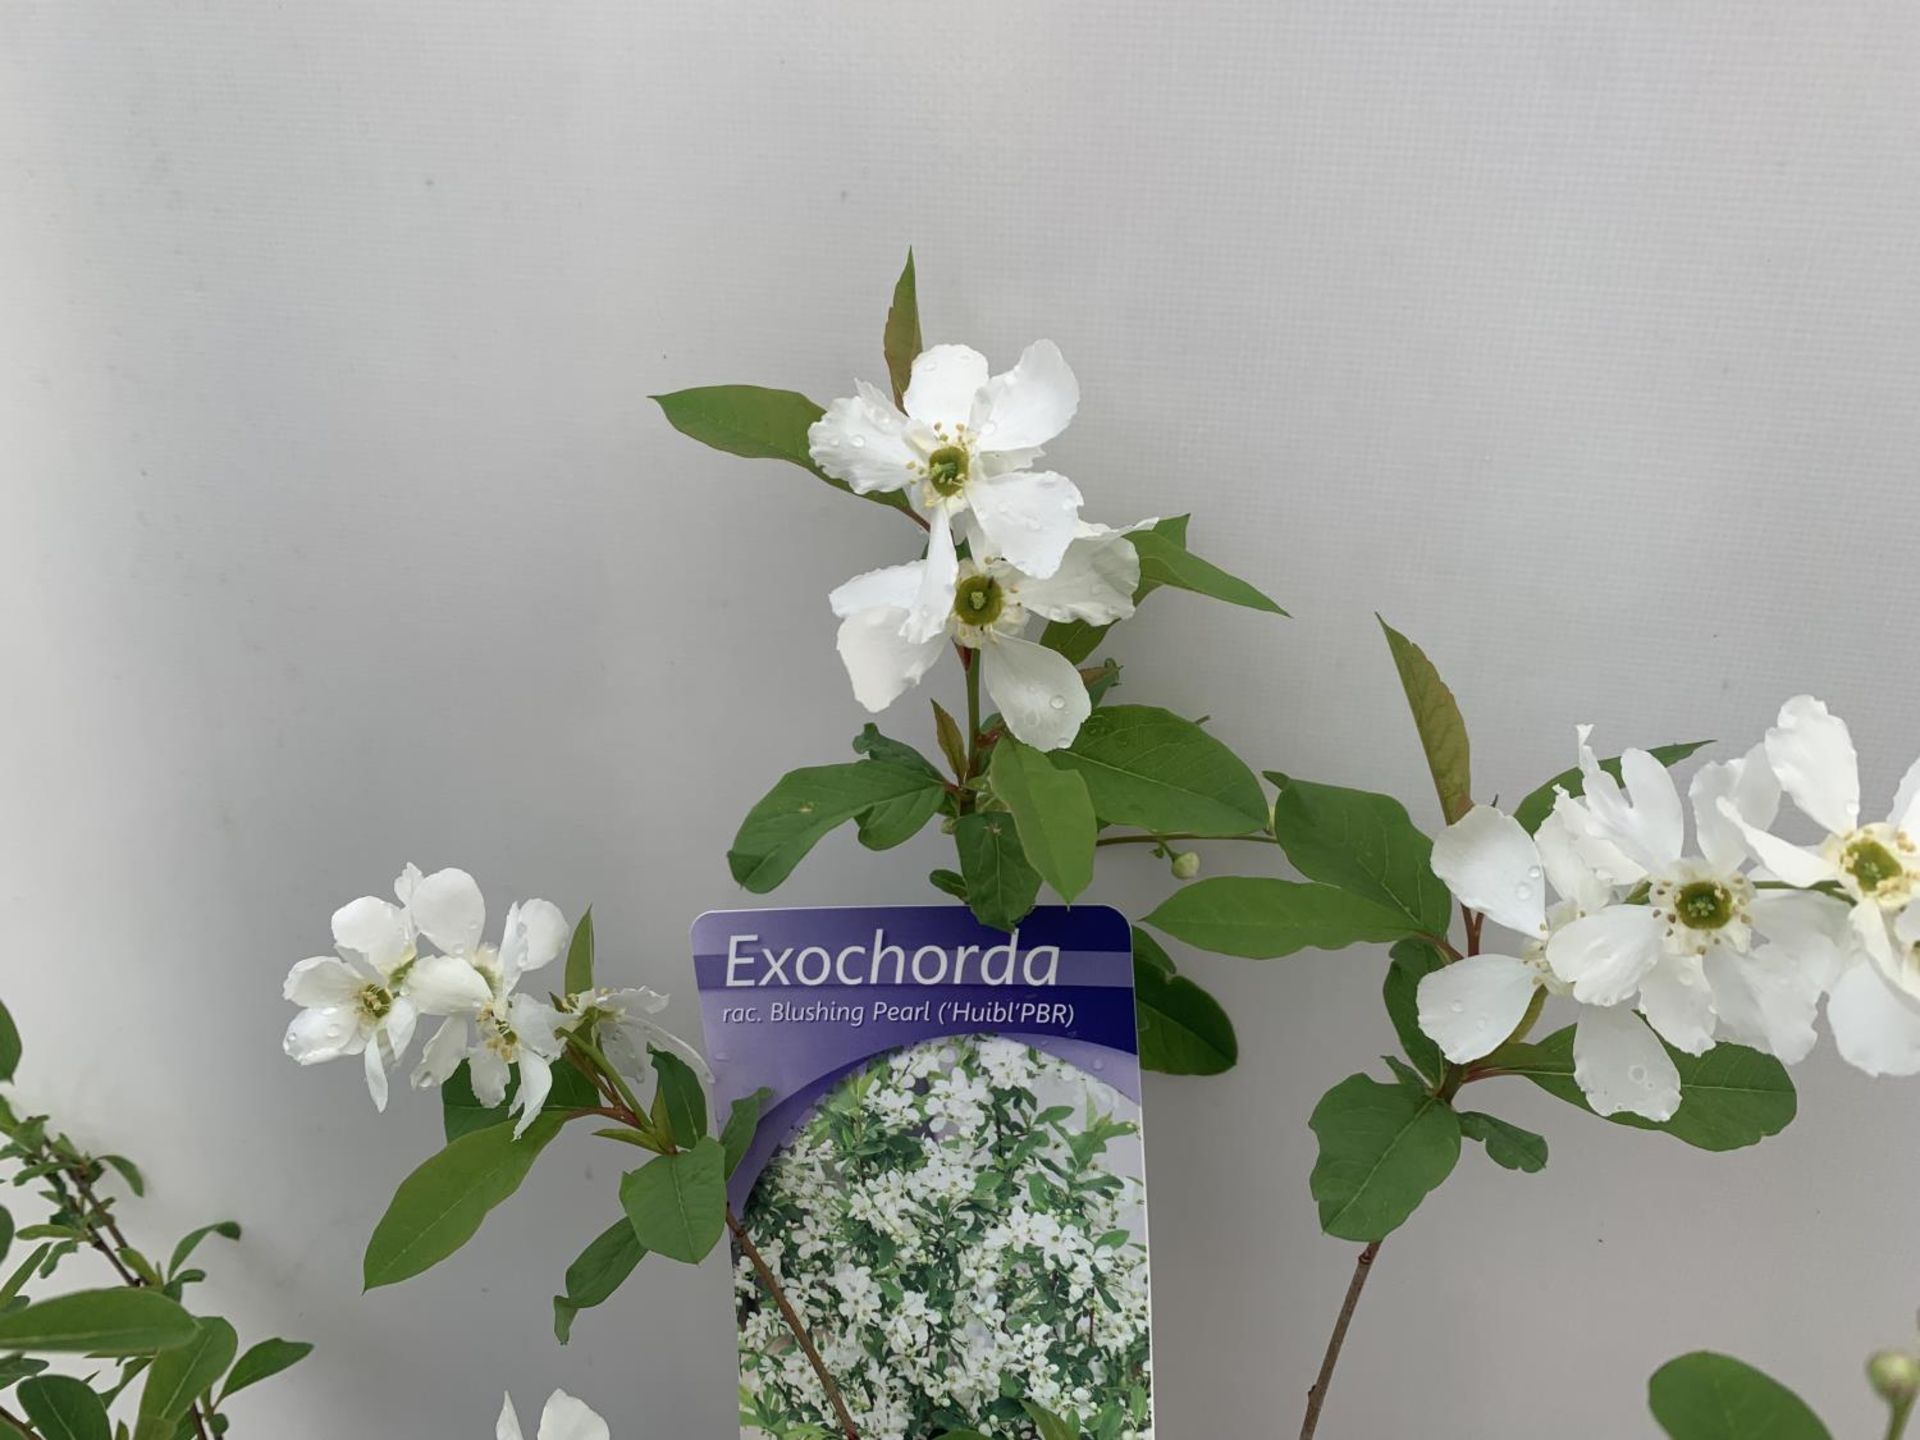 TWO EXOCHORDA 'NIAGARA' AND 'BLUSHING PEARL' APPROX 60CM IN HEIGHT IN 2 LTR POTS PLUS VAT TO BE SOLD - Image 4 of 6